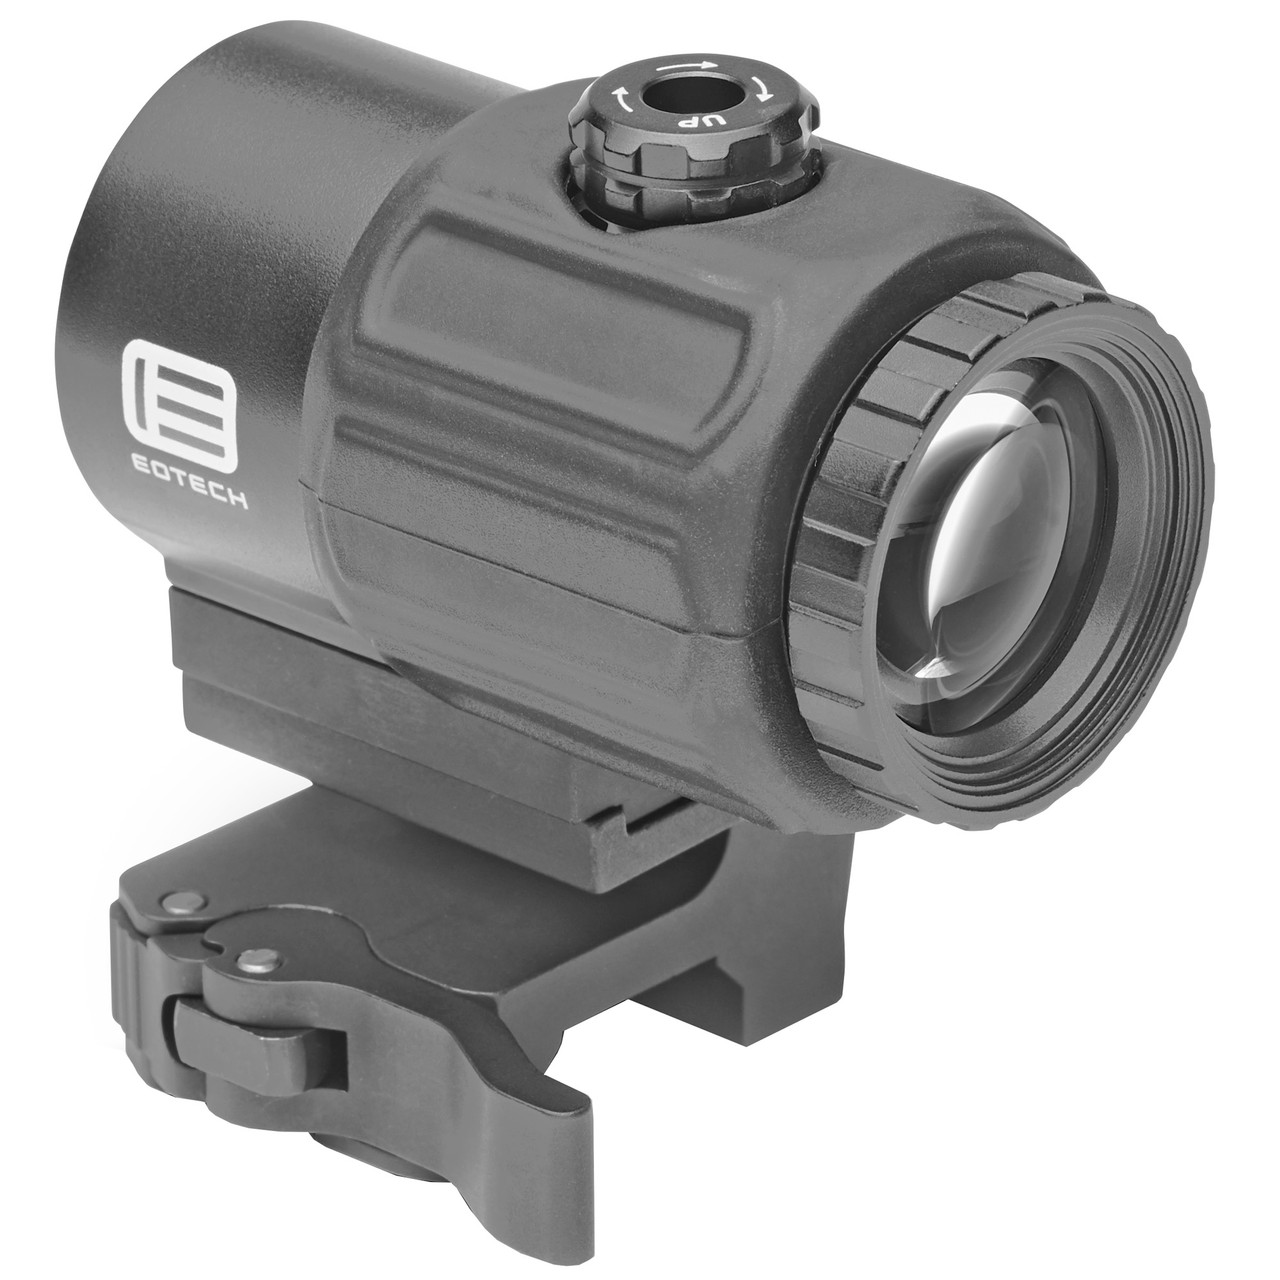 EOTech, G43, Magnifier, 3X, QD Mount, Switch to Side, Tool-Free Vertical and Horizontal Adjustments, Black, 34mm